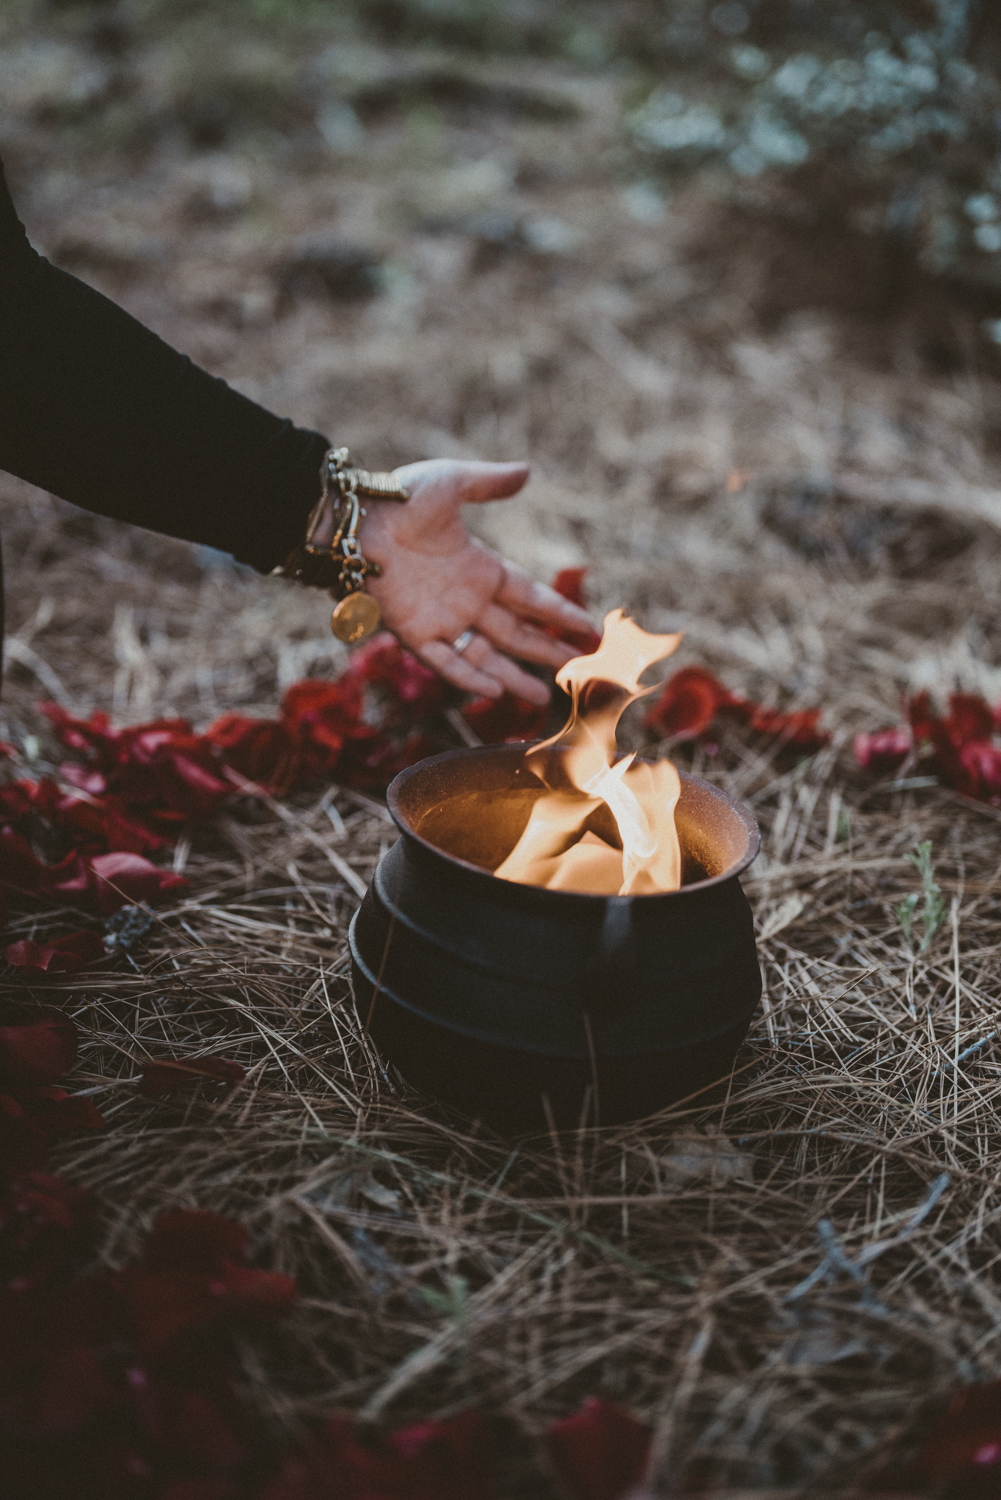 cauldron in a circle of red rose petals, with flames inside